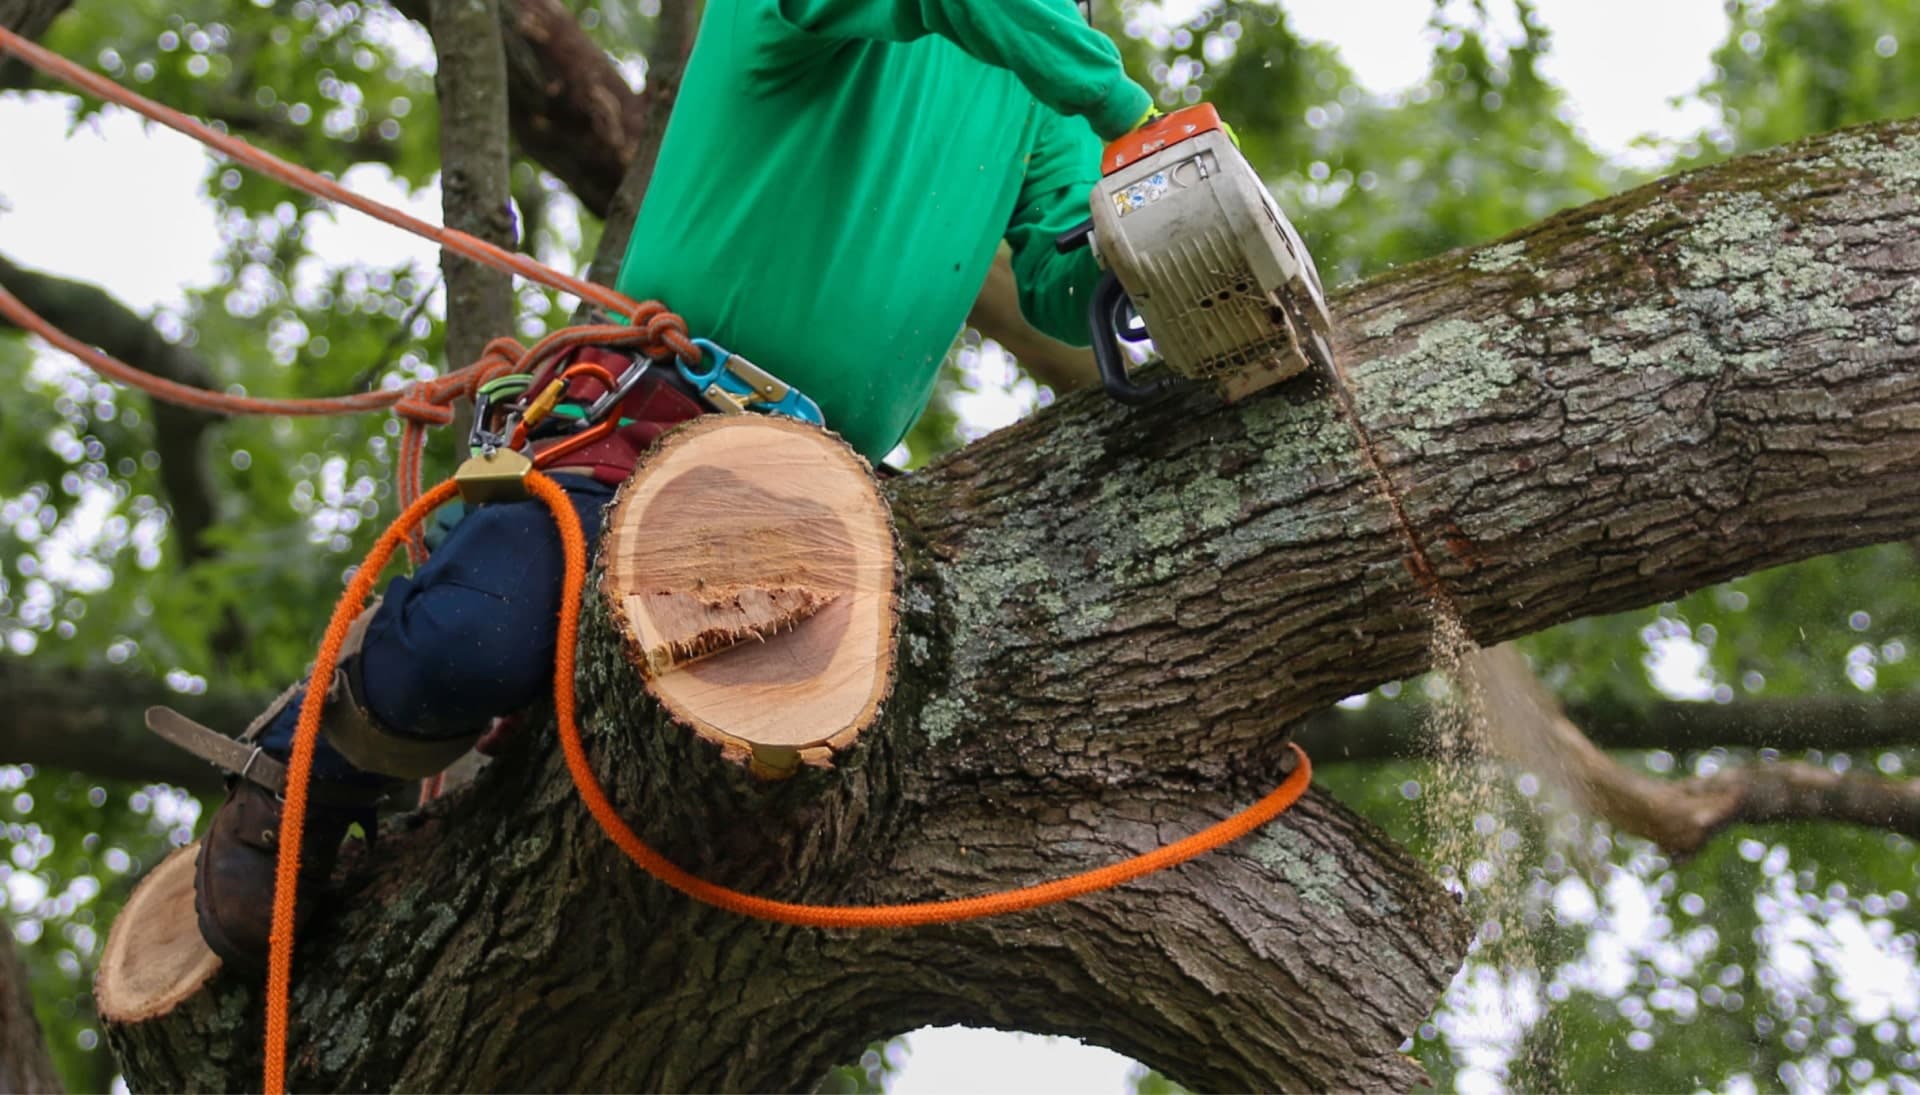 Shed your worries away with best tree removal in Myrtle Beach